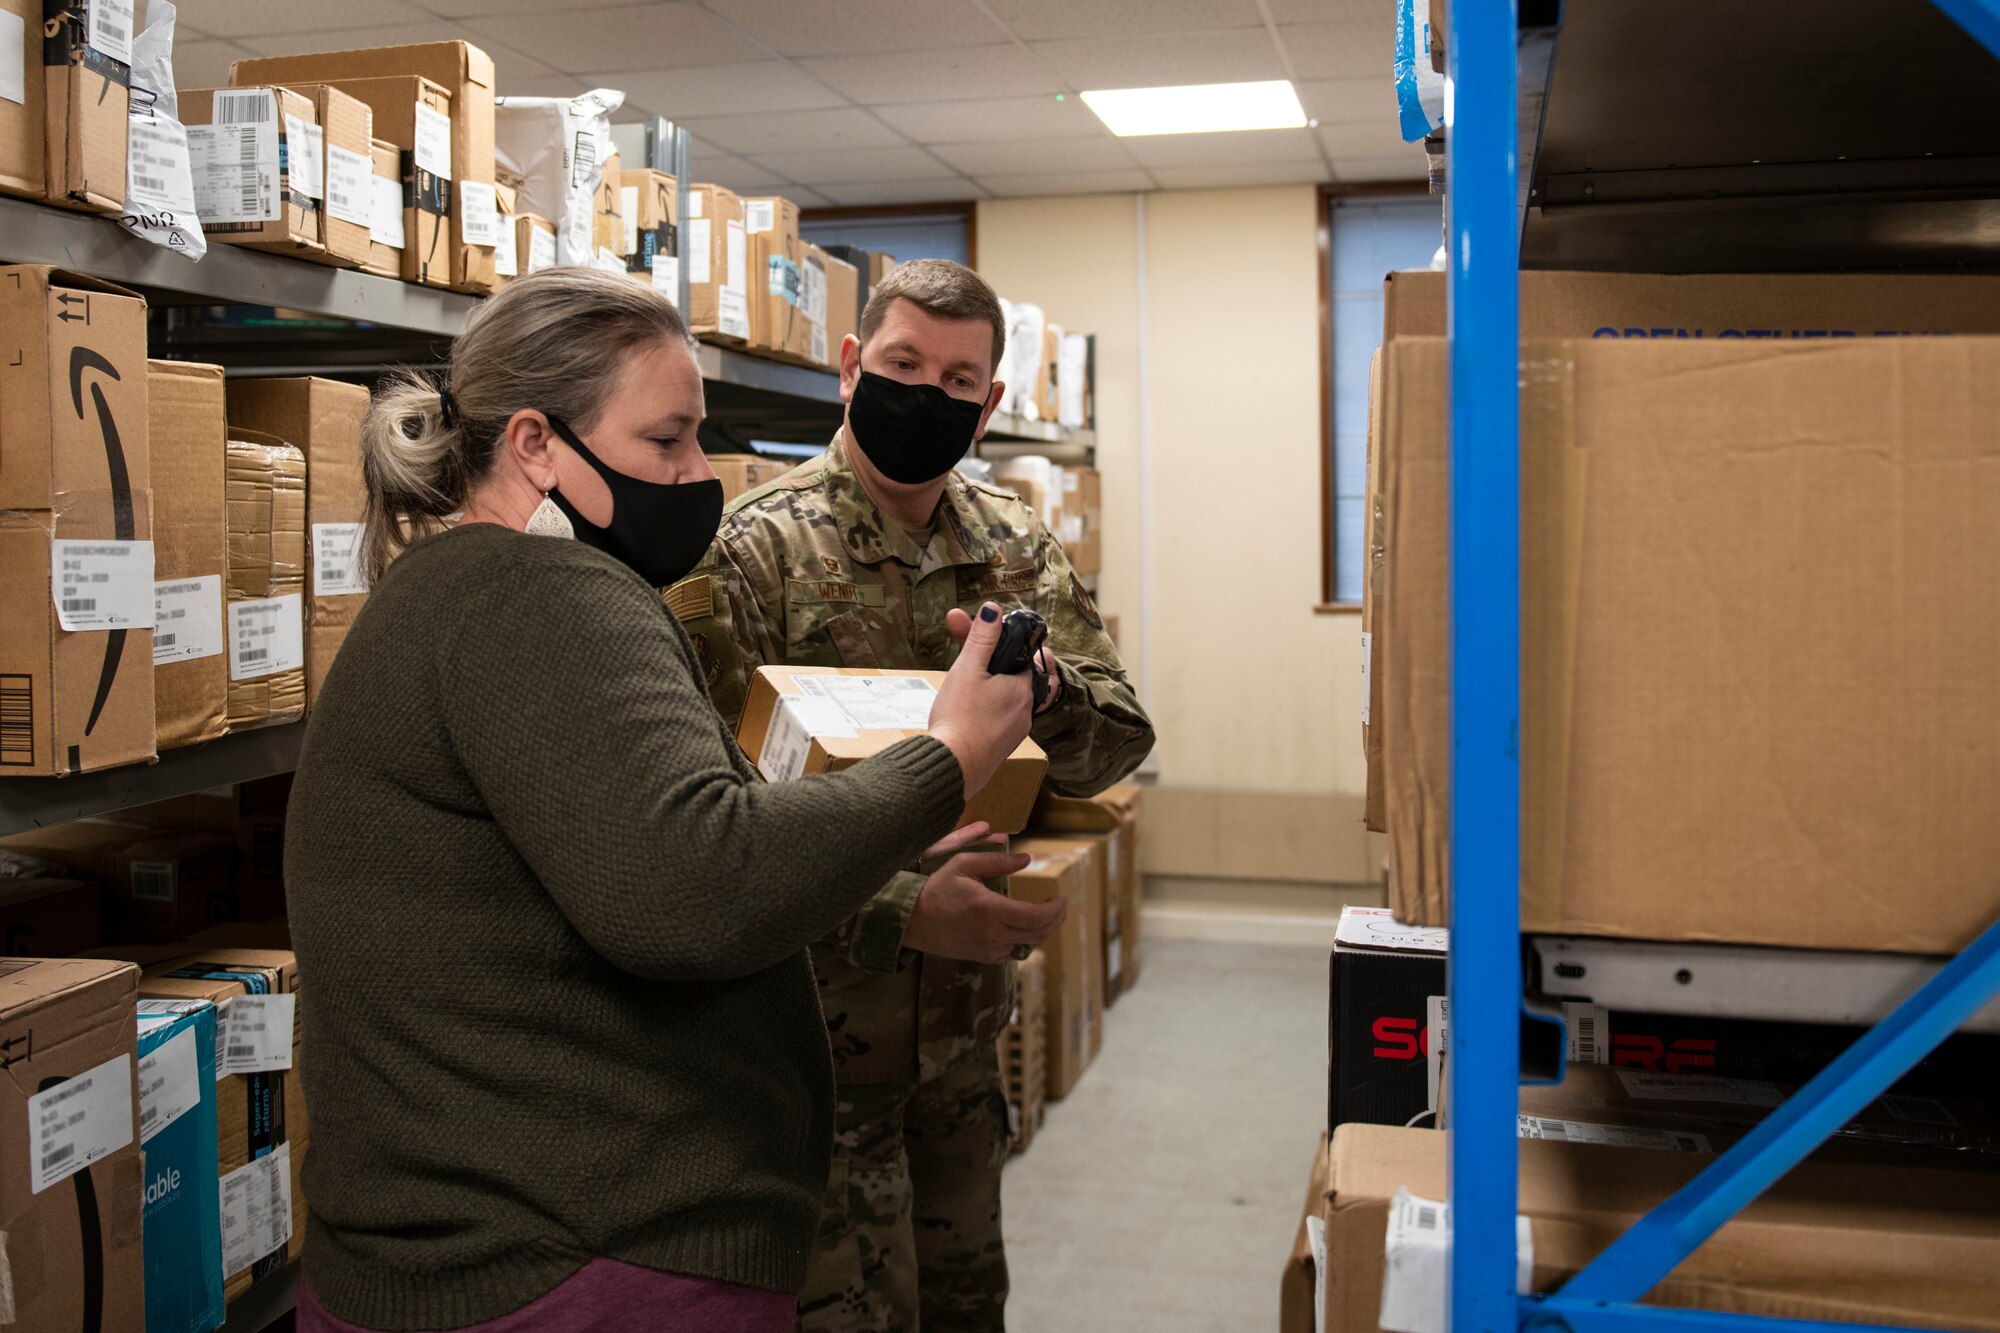 A volunteer shows U.S. Air Force Col. Kurt Wendt, right, 501st Combat Support Wing commander, how to scan packages at the Royal Air Force Molesworth Post Office, England, Dec. 9, 2020. Airmen and civilians have volunteered at the post office to help with the influx of packages during the holiday season. (U.S. Air Force photo by Senior Airman Jennifer Zima)